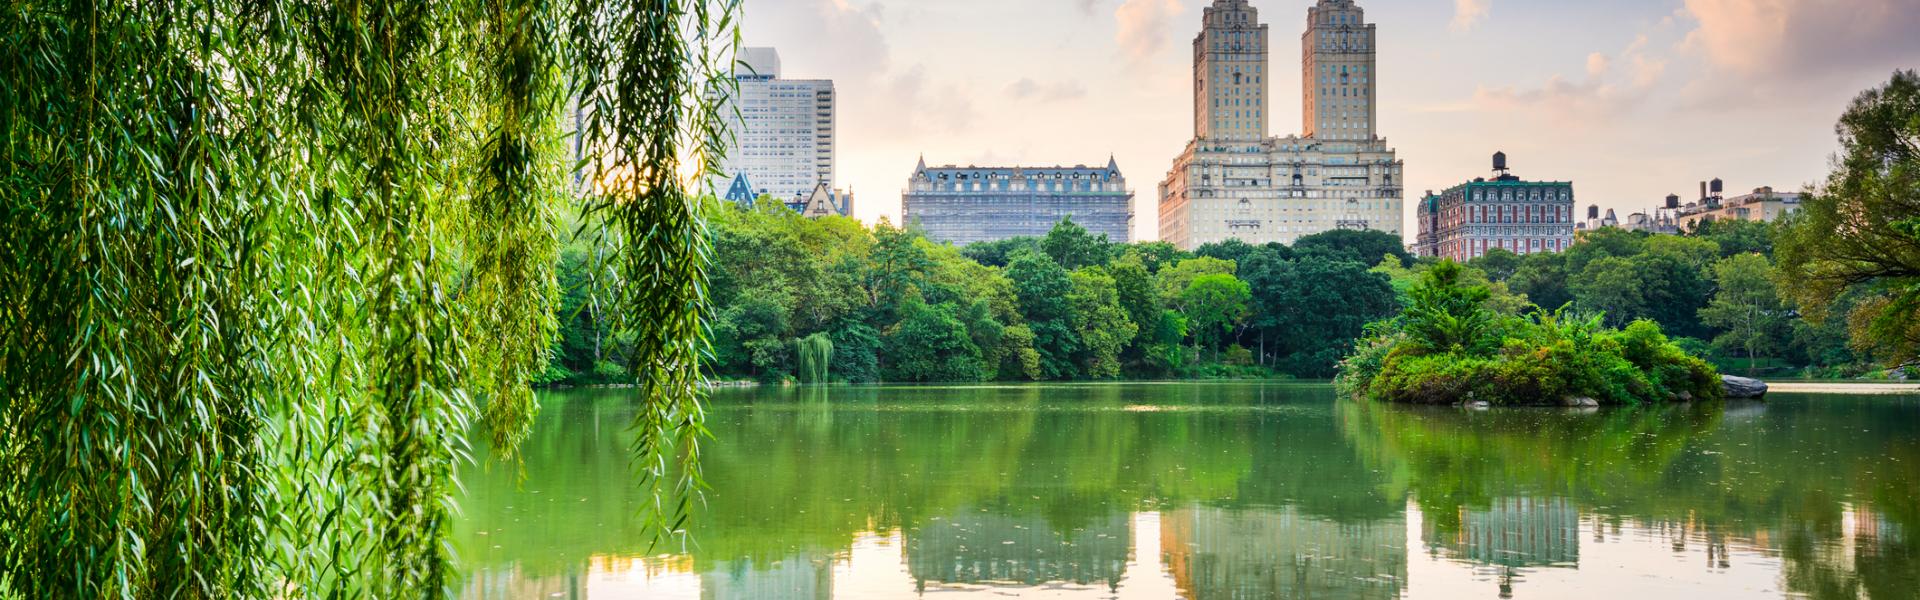 Hotels and Vacation Rentals Near Central Park - HomeToGo